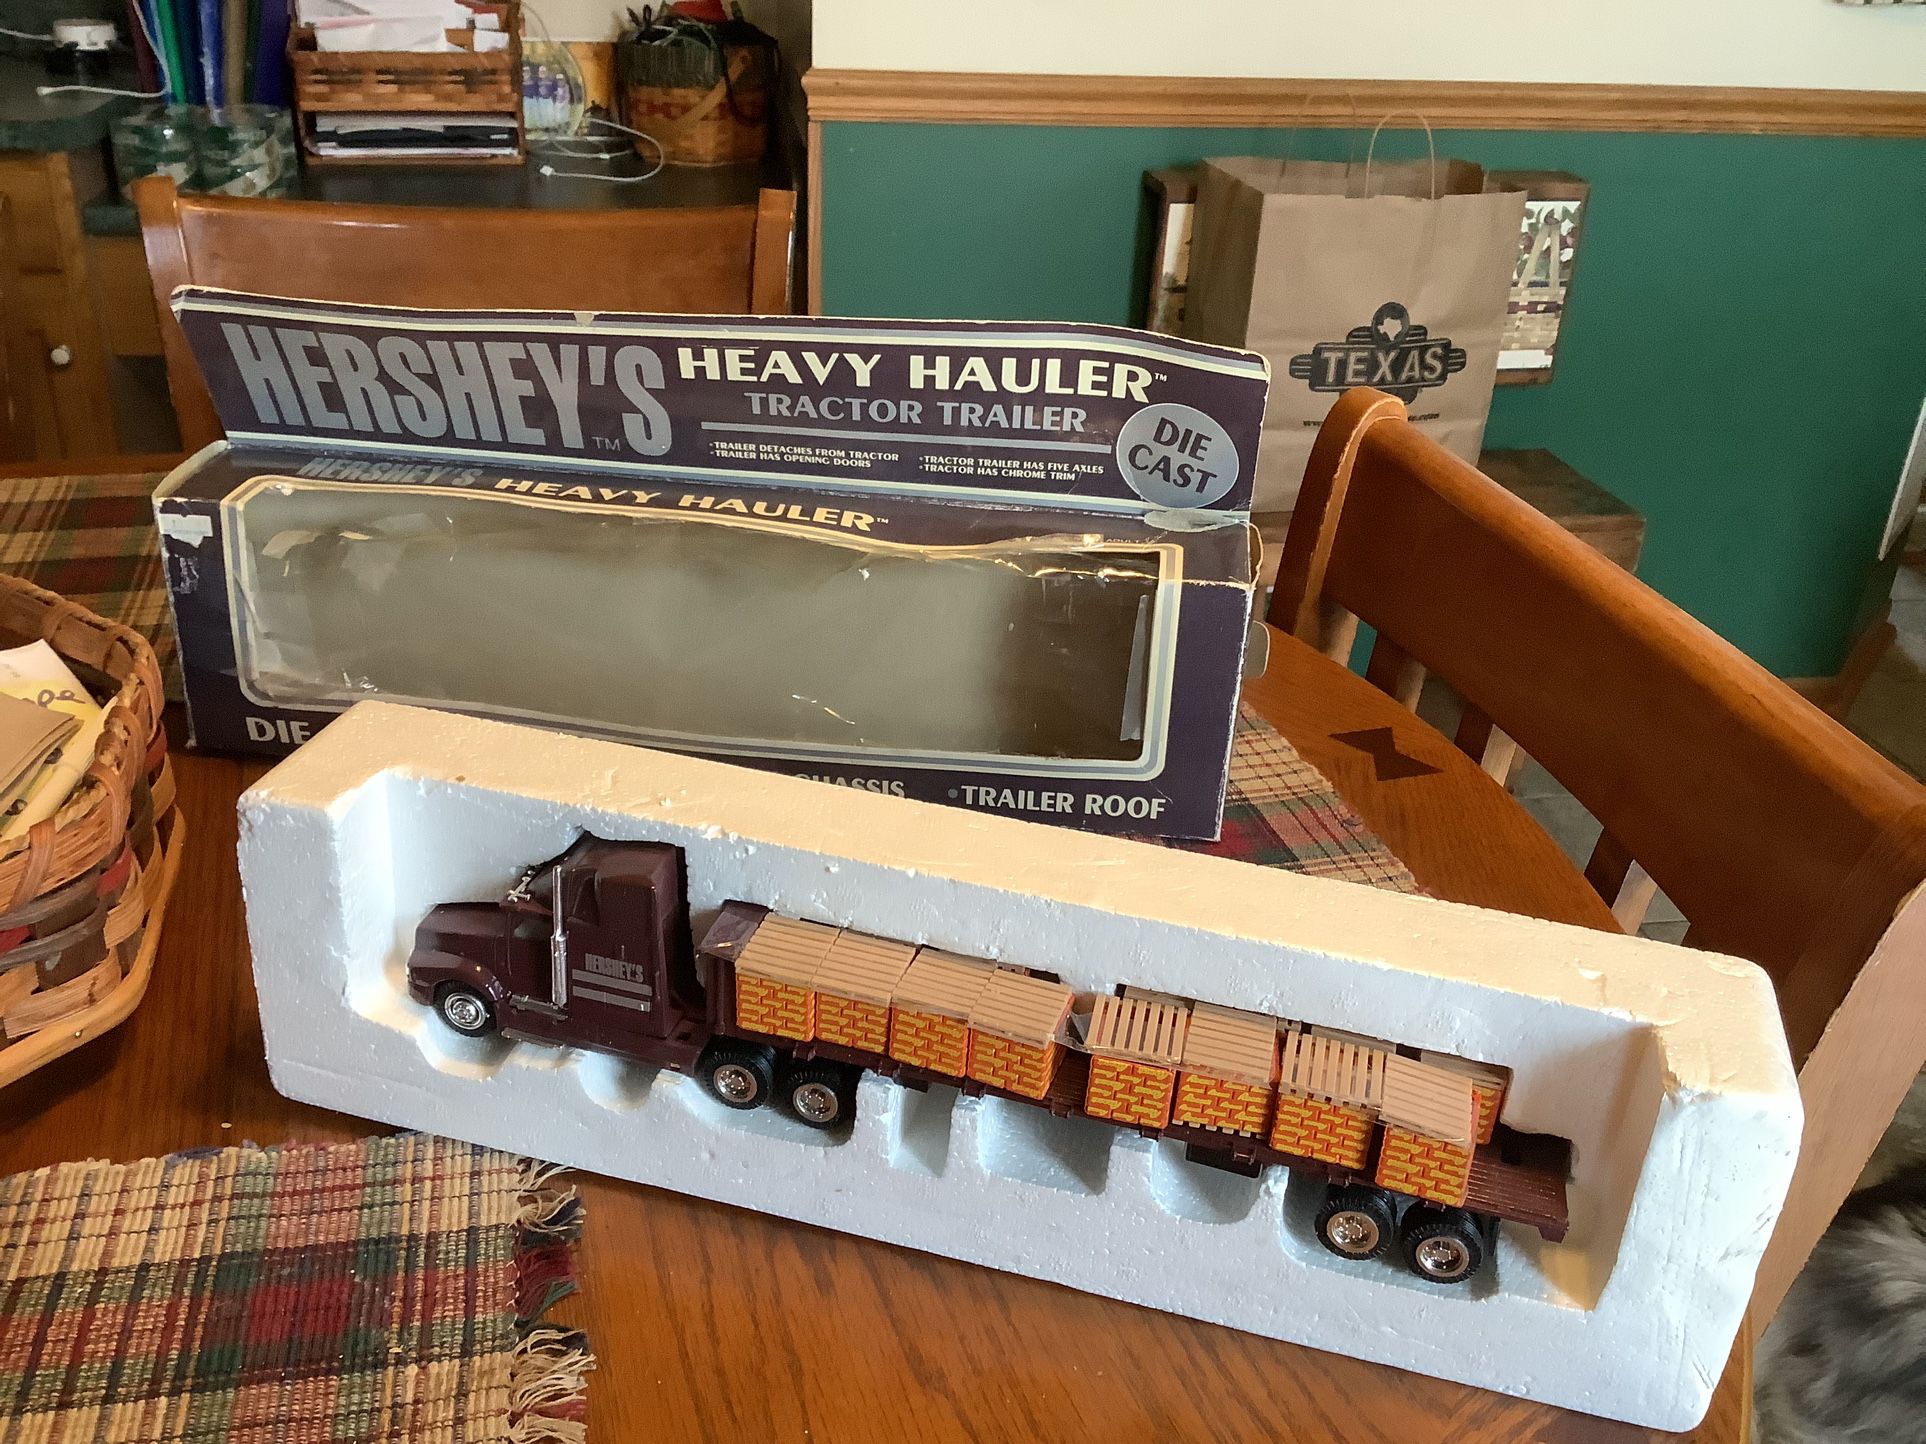 K-Line Hershey’s Heavy Hauler Tractor Trailer : Reese’s Peanut Butter Cups Box is a little rough but truck is mint never played with  Die cast metal t